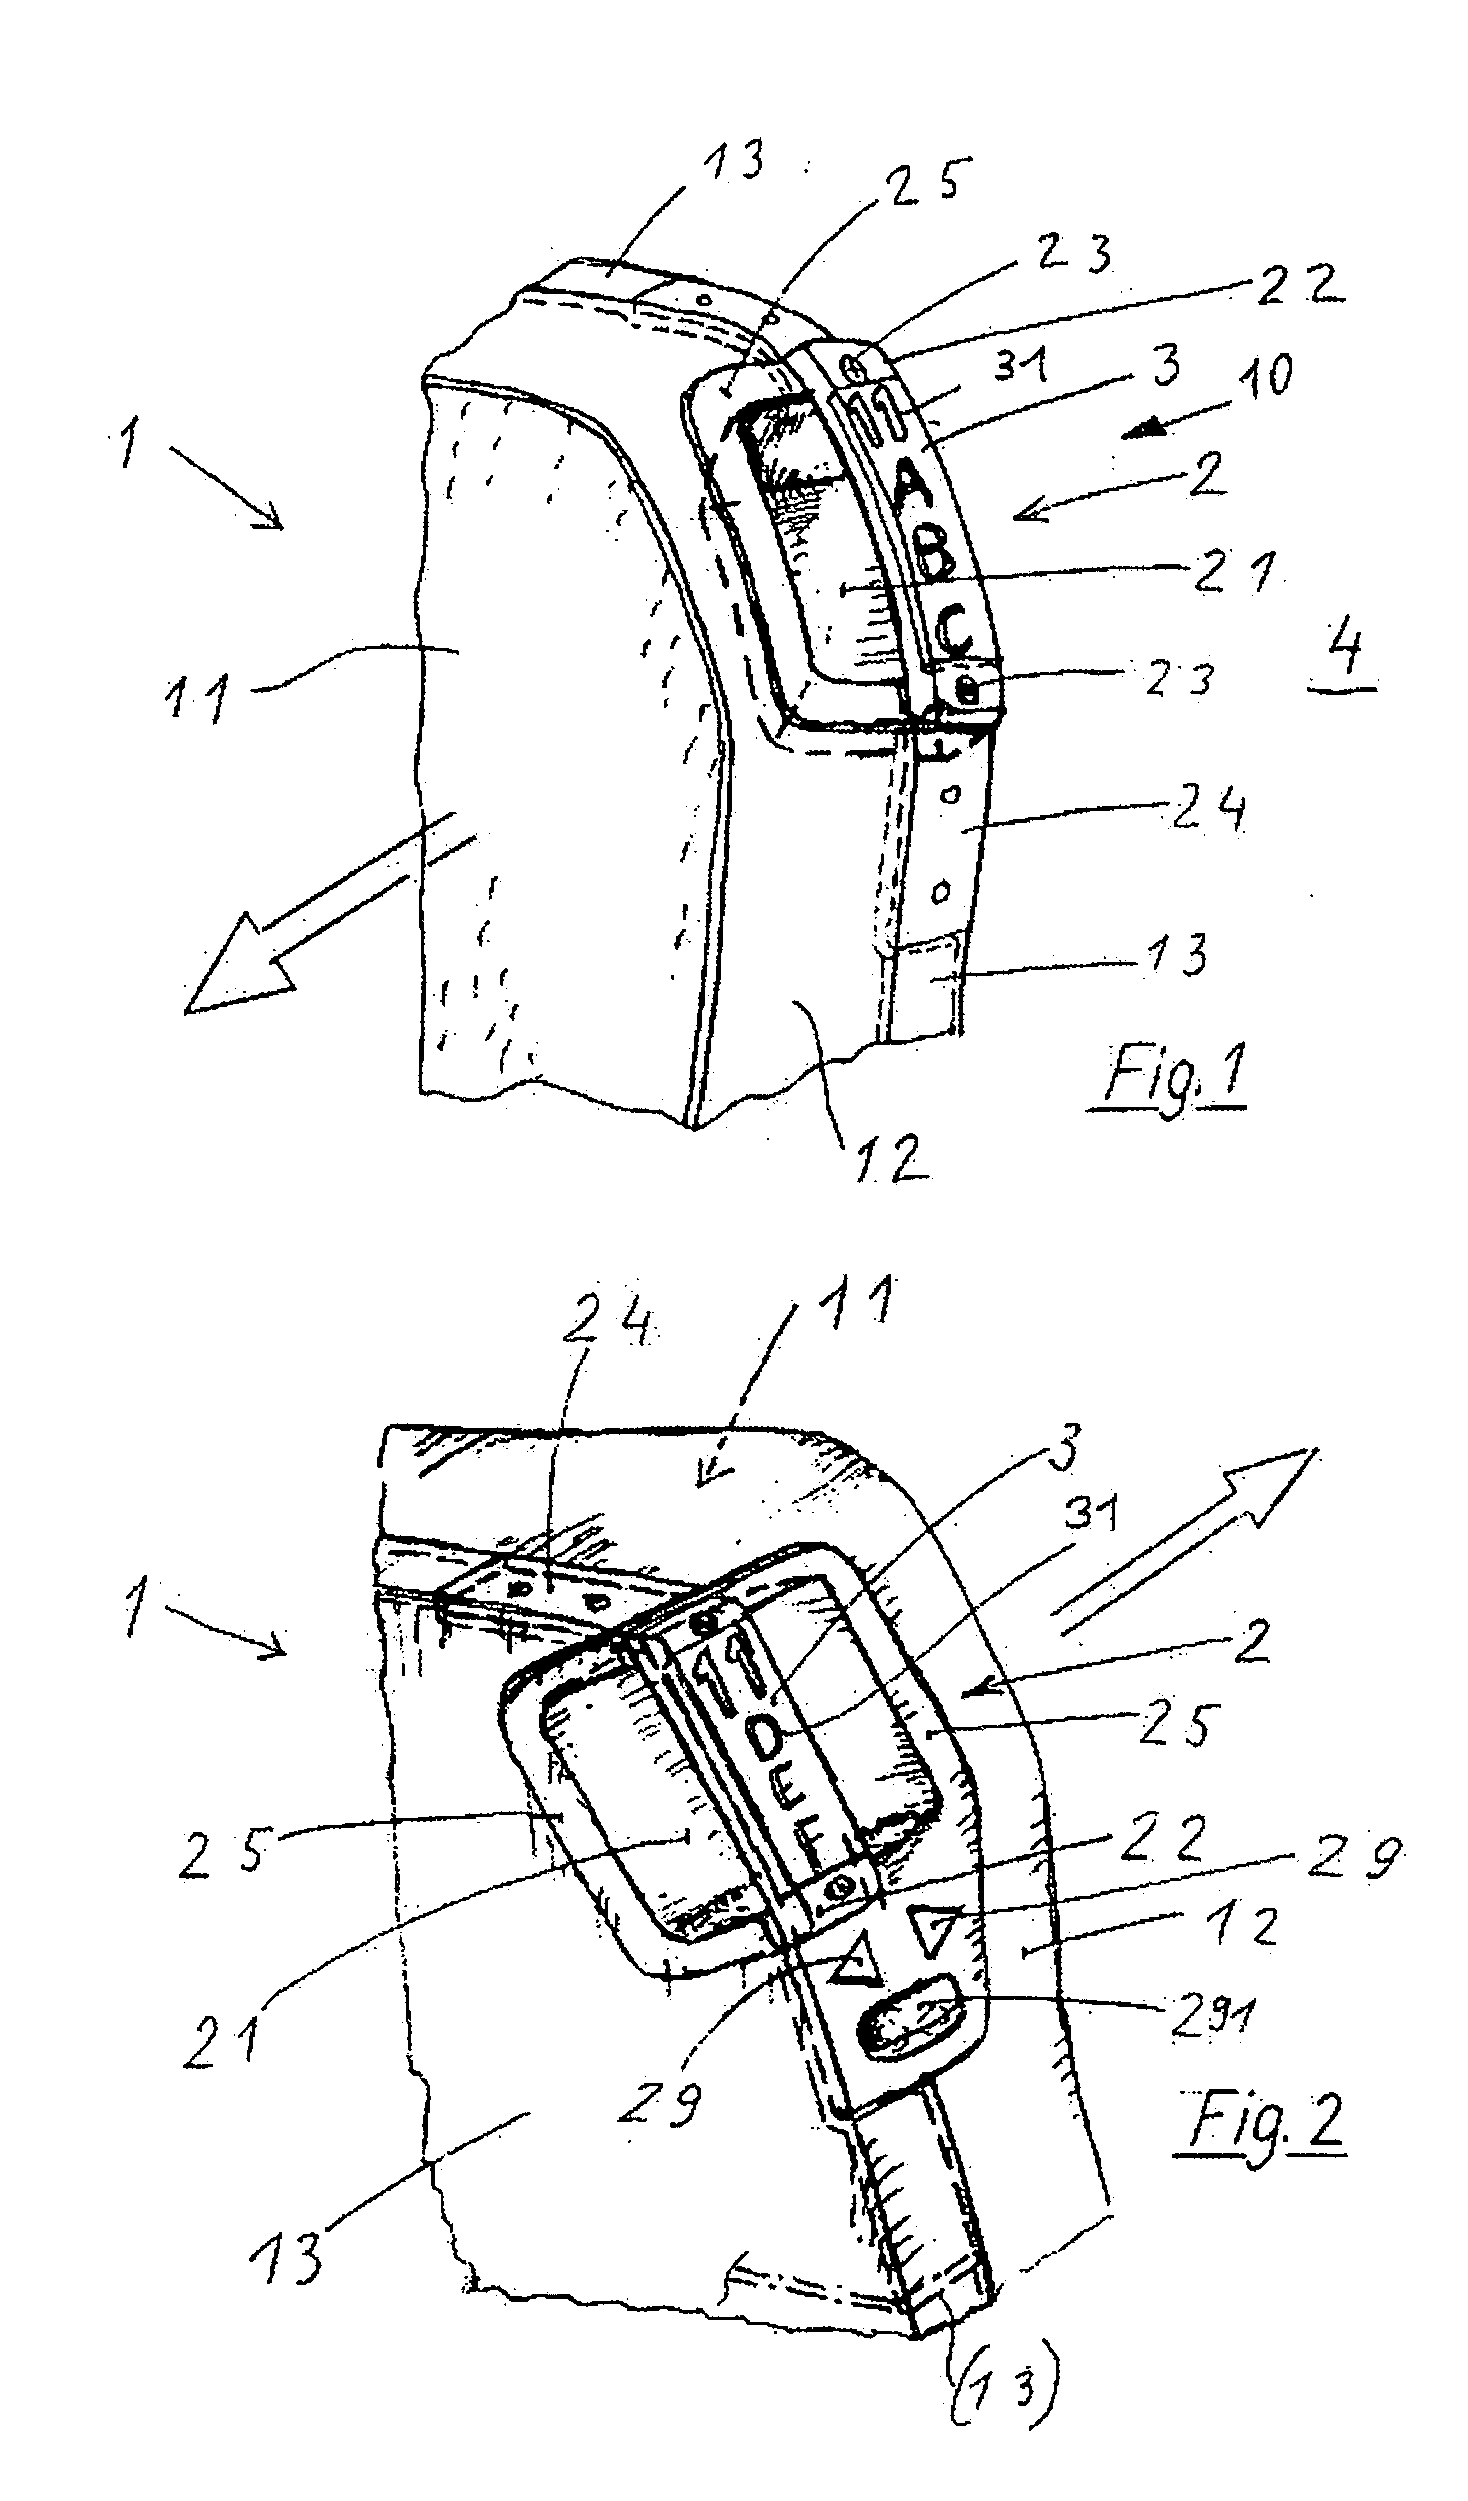 Arrangement of a safety and information device on at least one passenger seat in a passenger cabin of a commercial aircraft